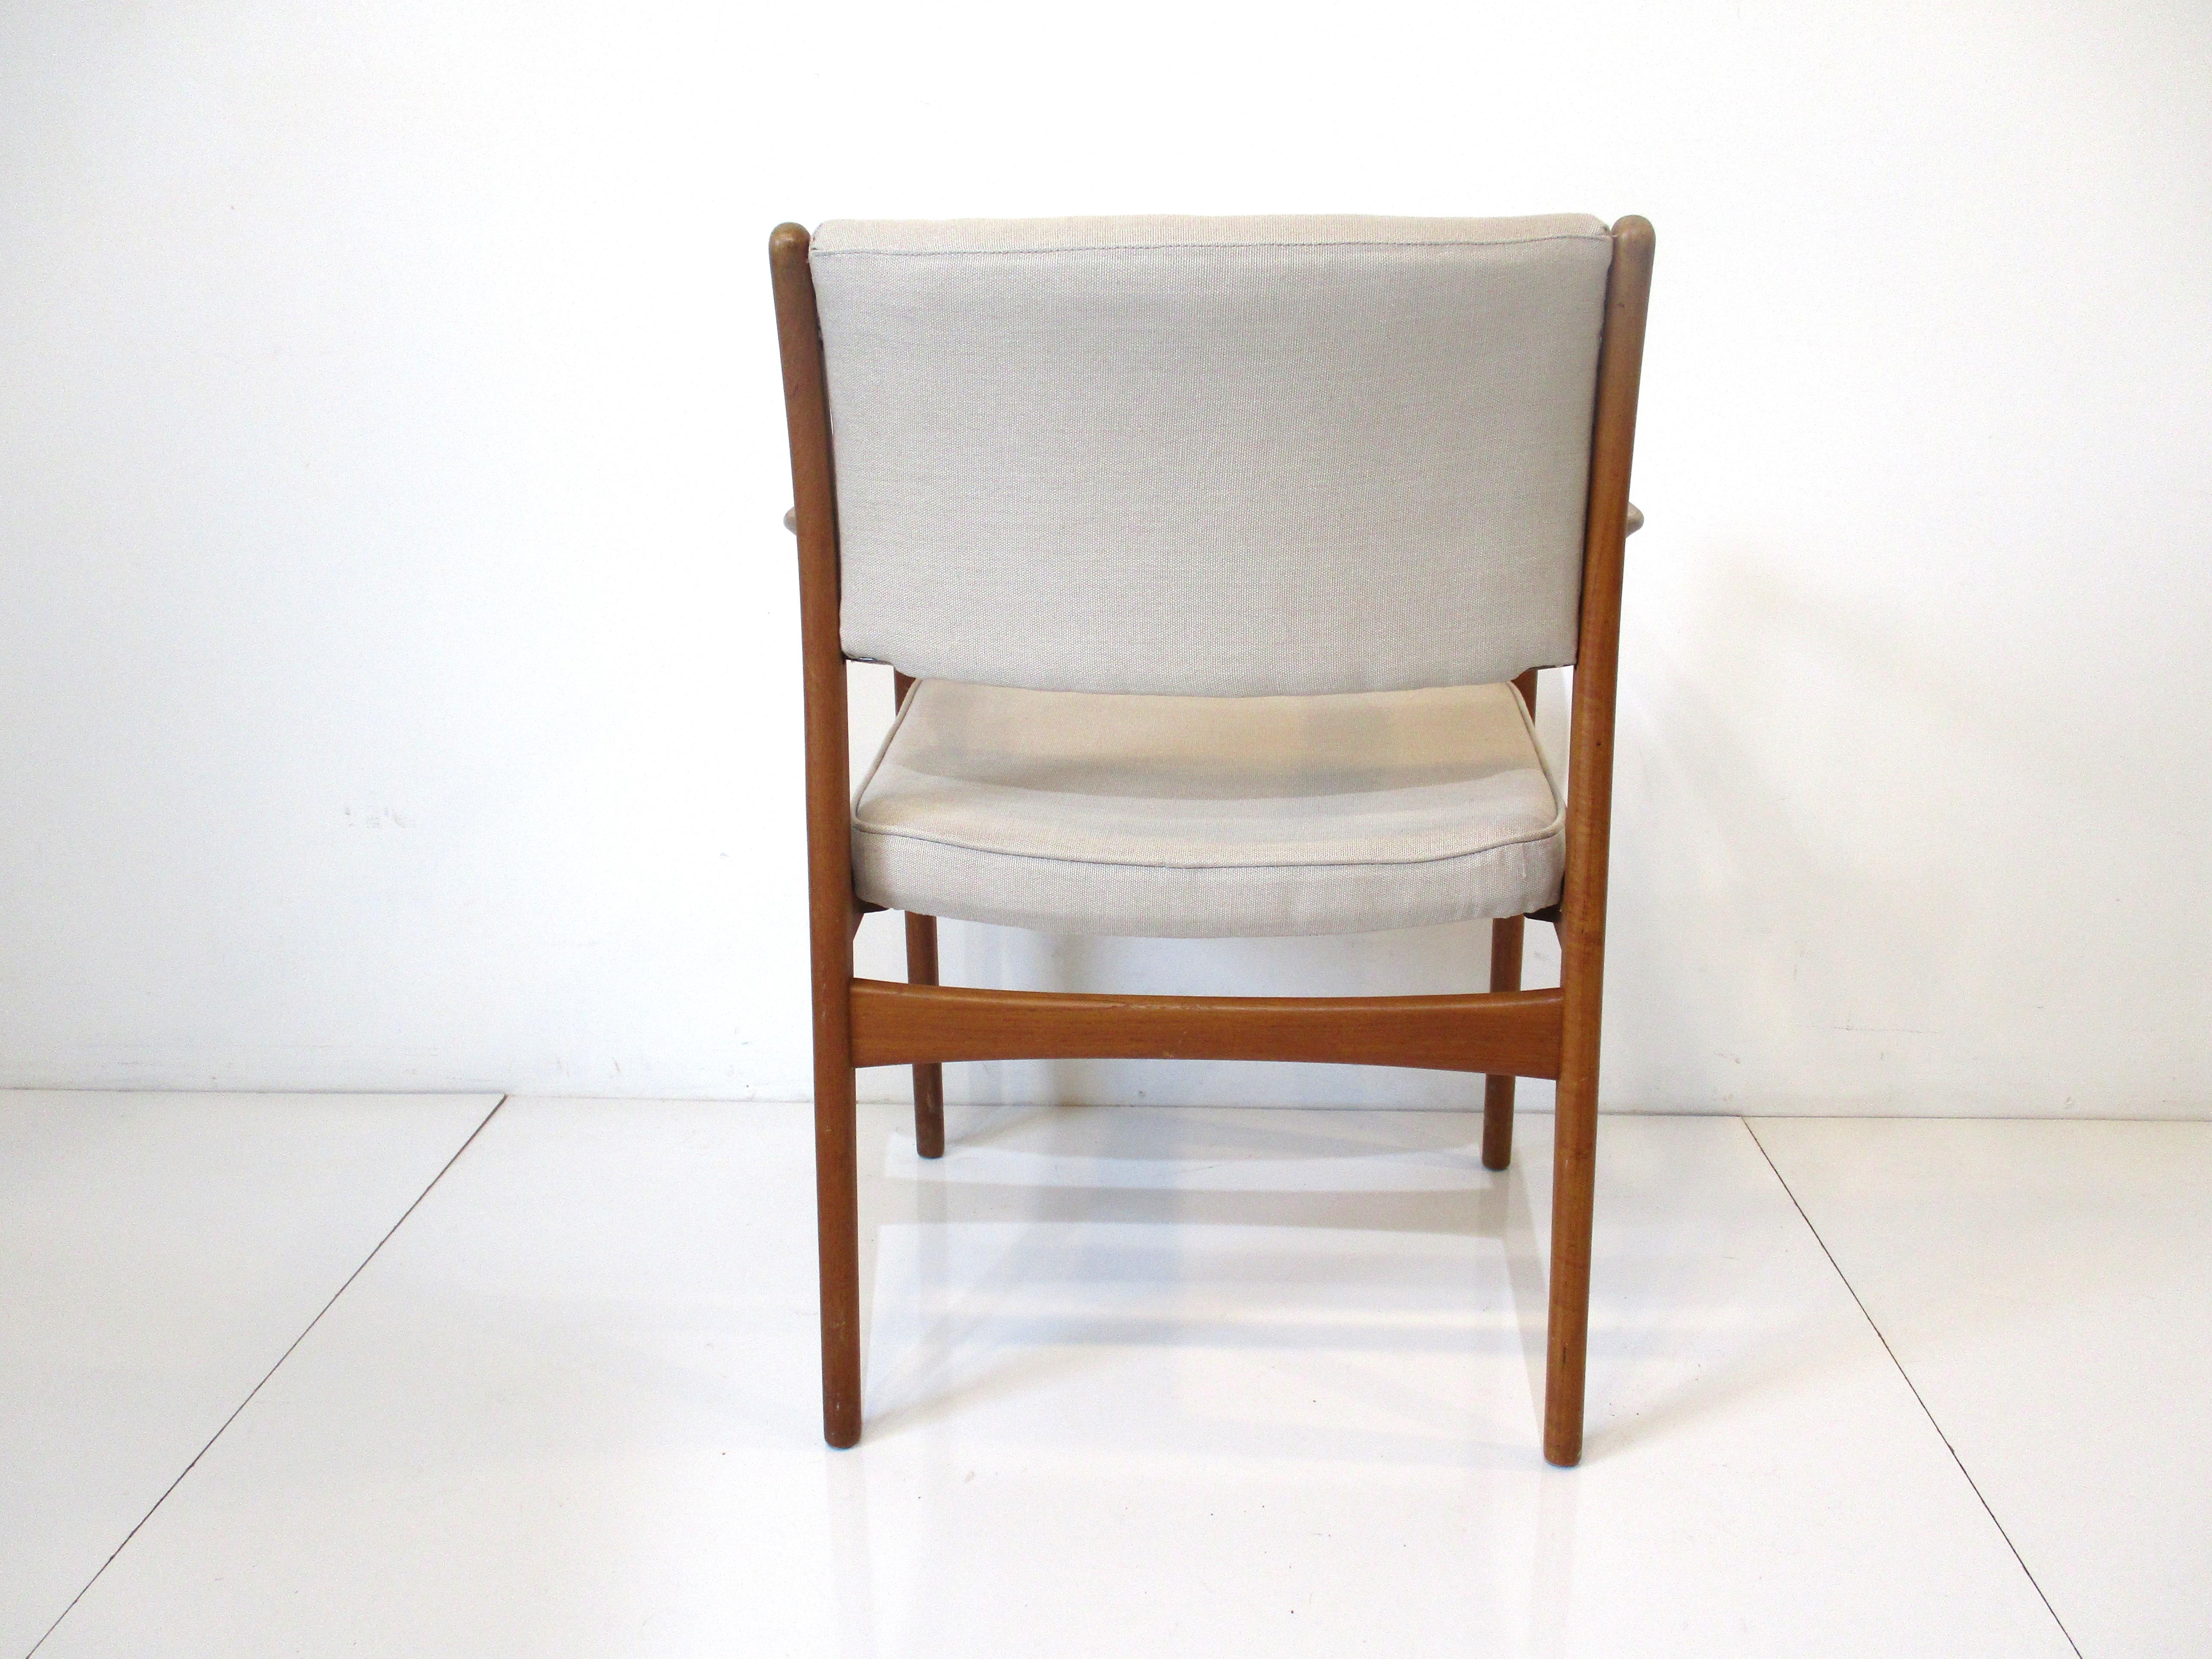 Teak Occasional Chair by Dux / Ekselius, Ohlsson Sweden In Good Condition For Sale In Cincinnati, OH